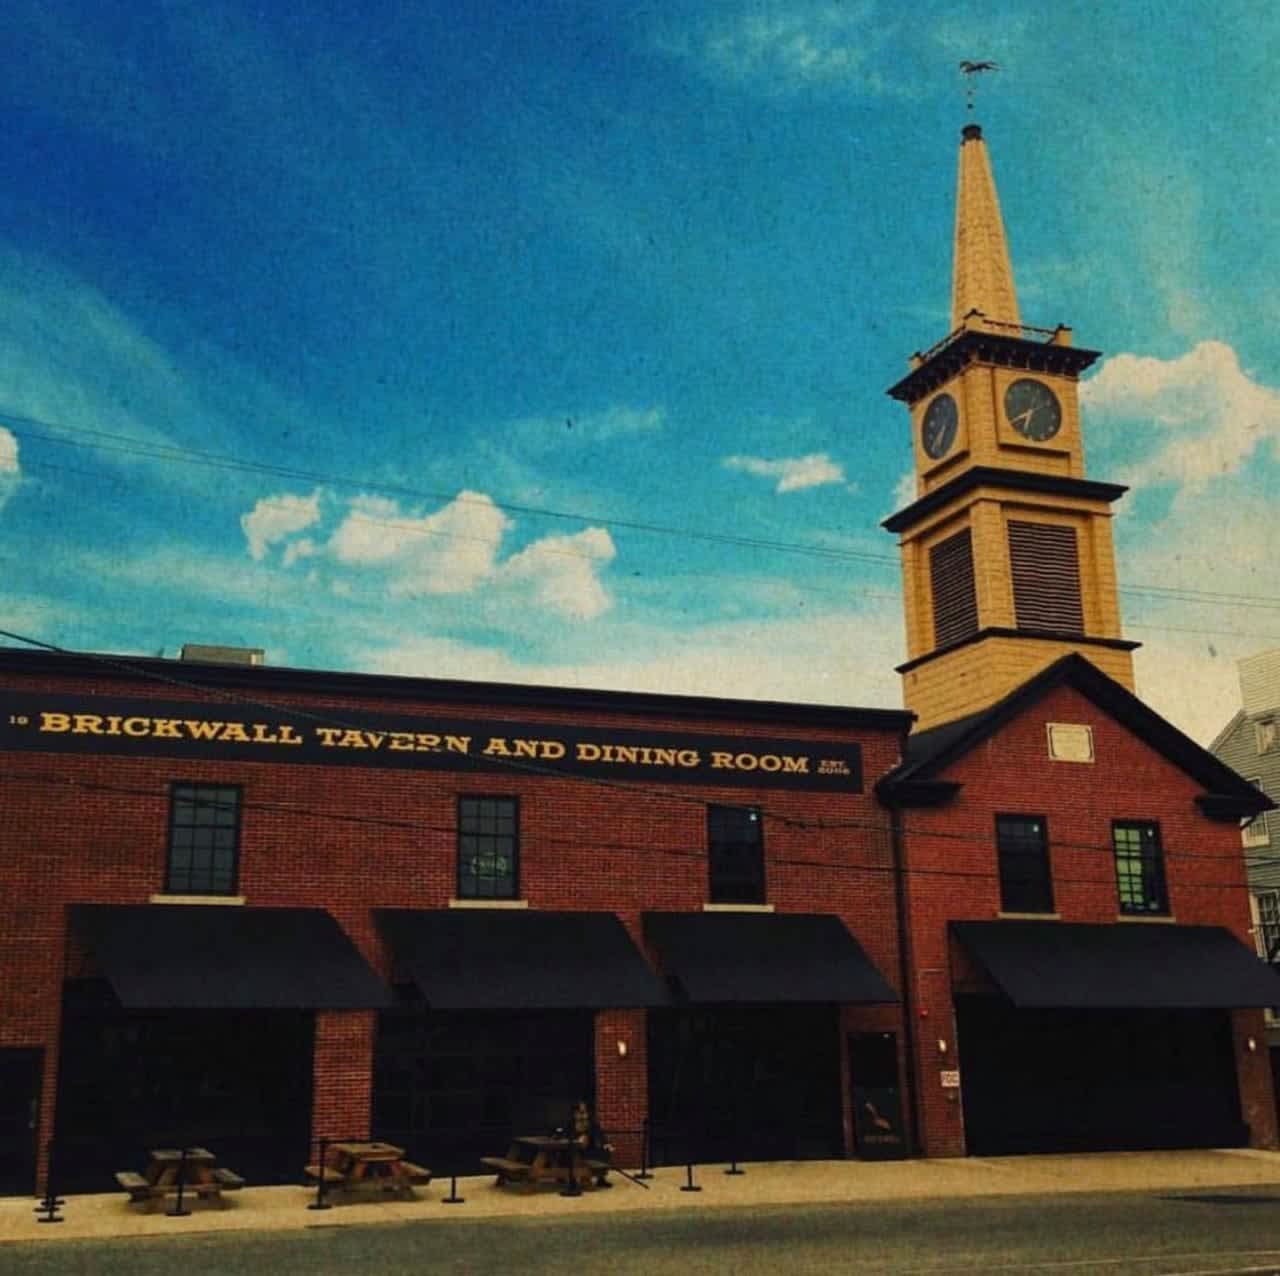 Brickwall Tavern opened in 2015 on East Union Street, in a building that used to be a firehouse.